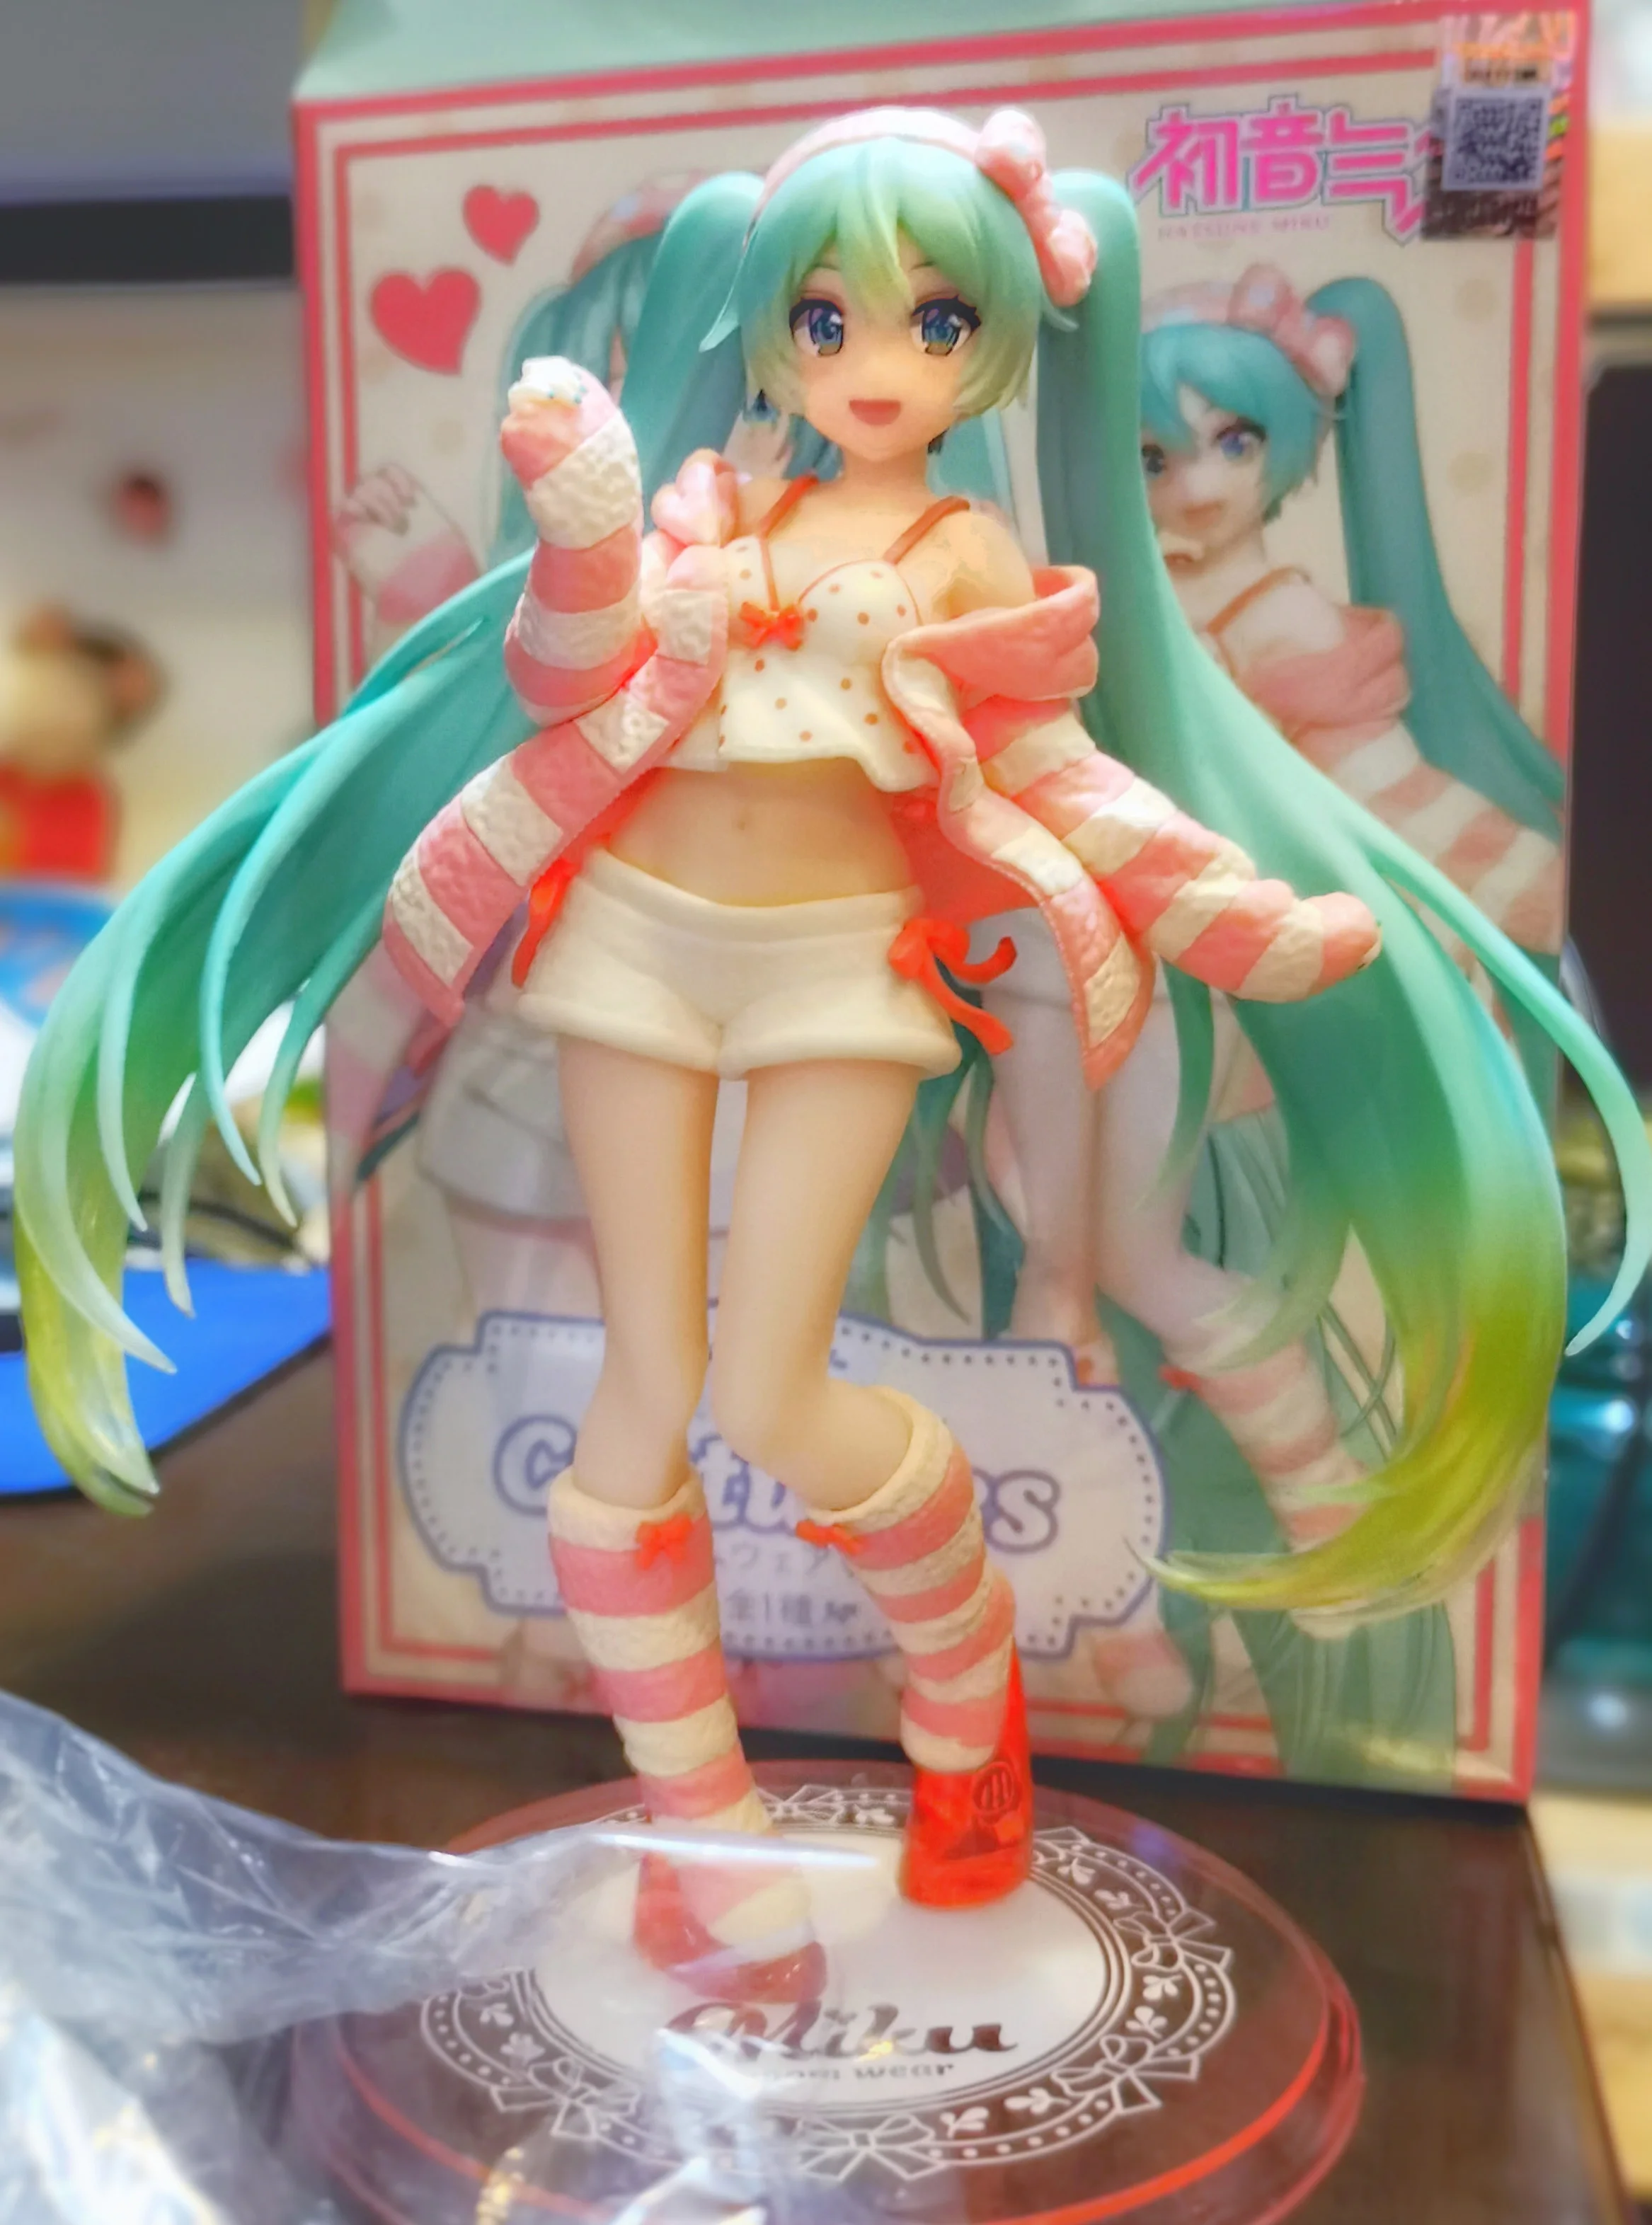 Anime Model Hatsune Miku Room Wear Action Figure PVC Doll Toy Decoration Gift Exquisite Boxed images - 6